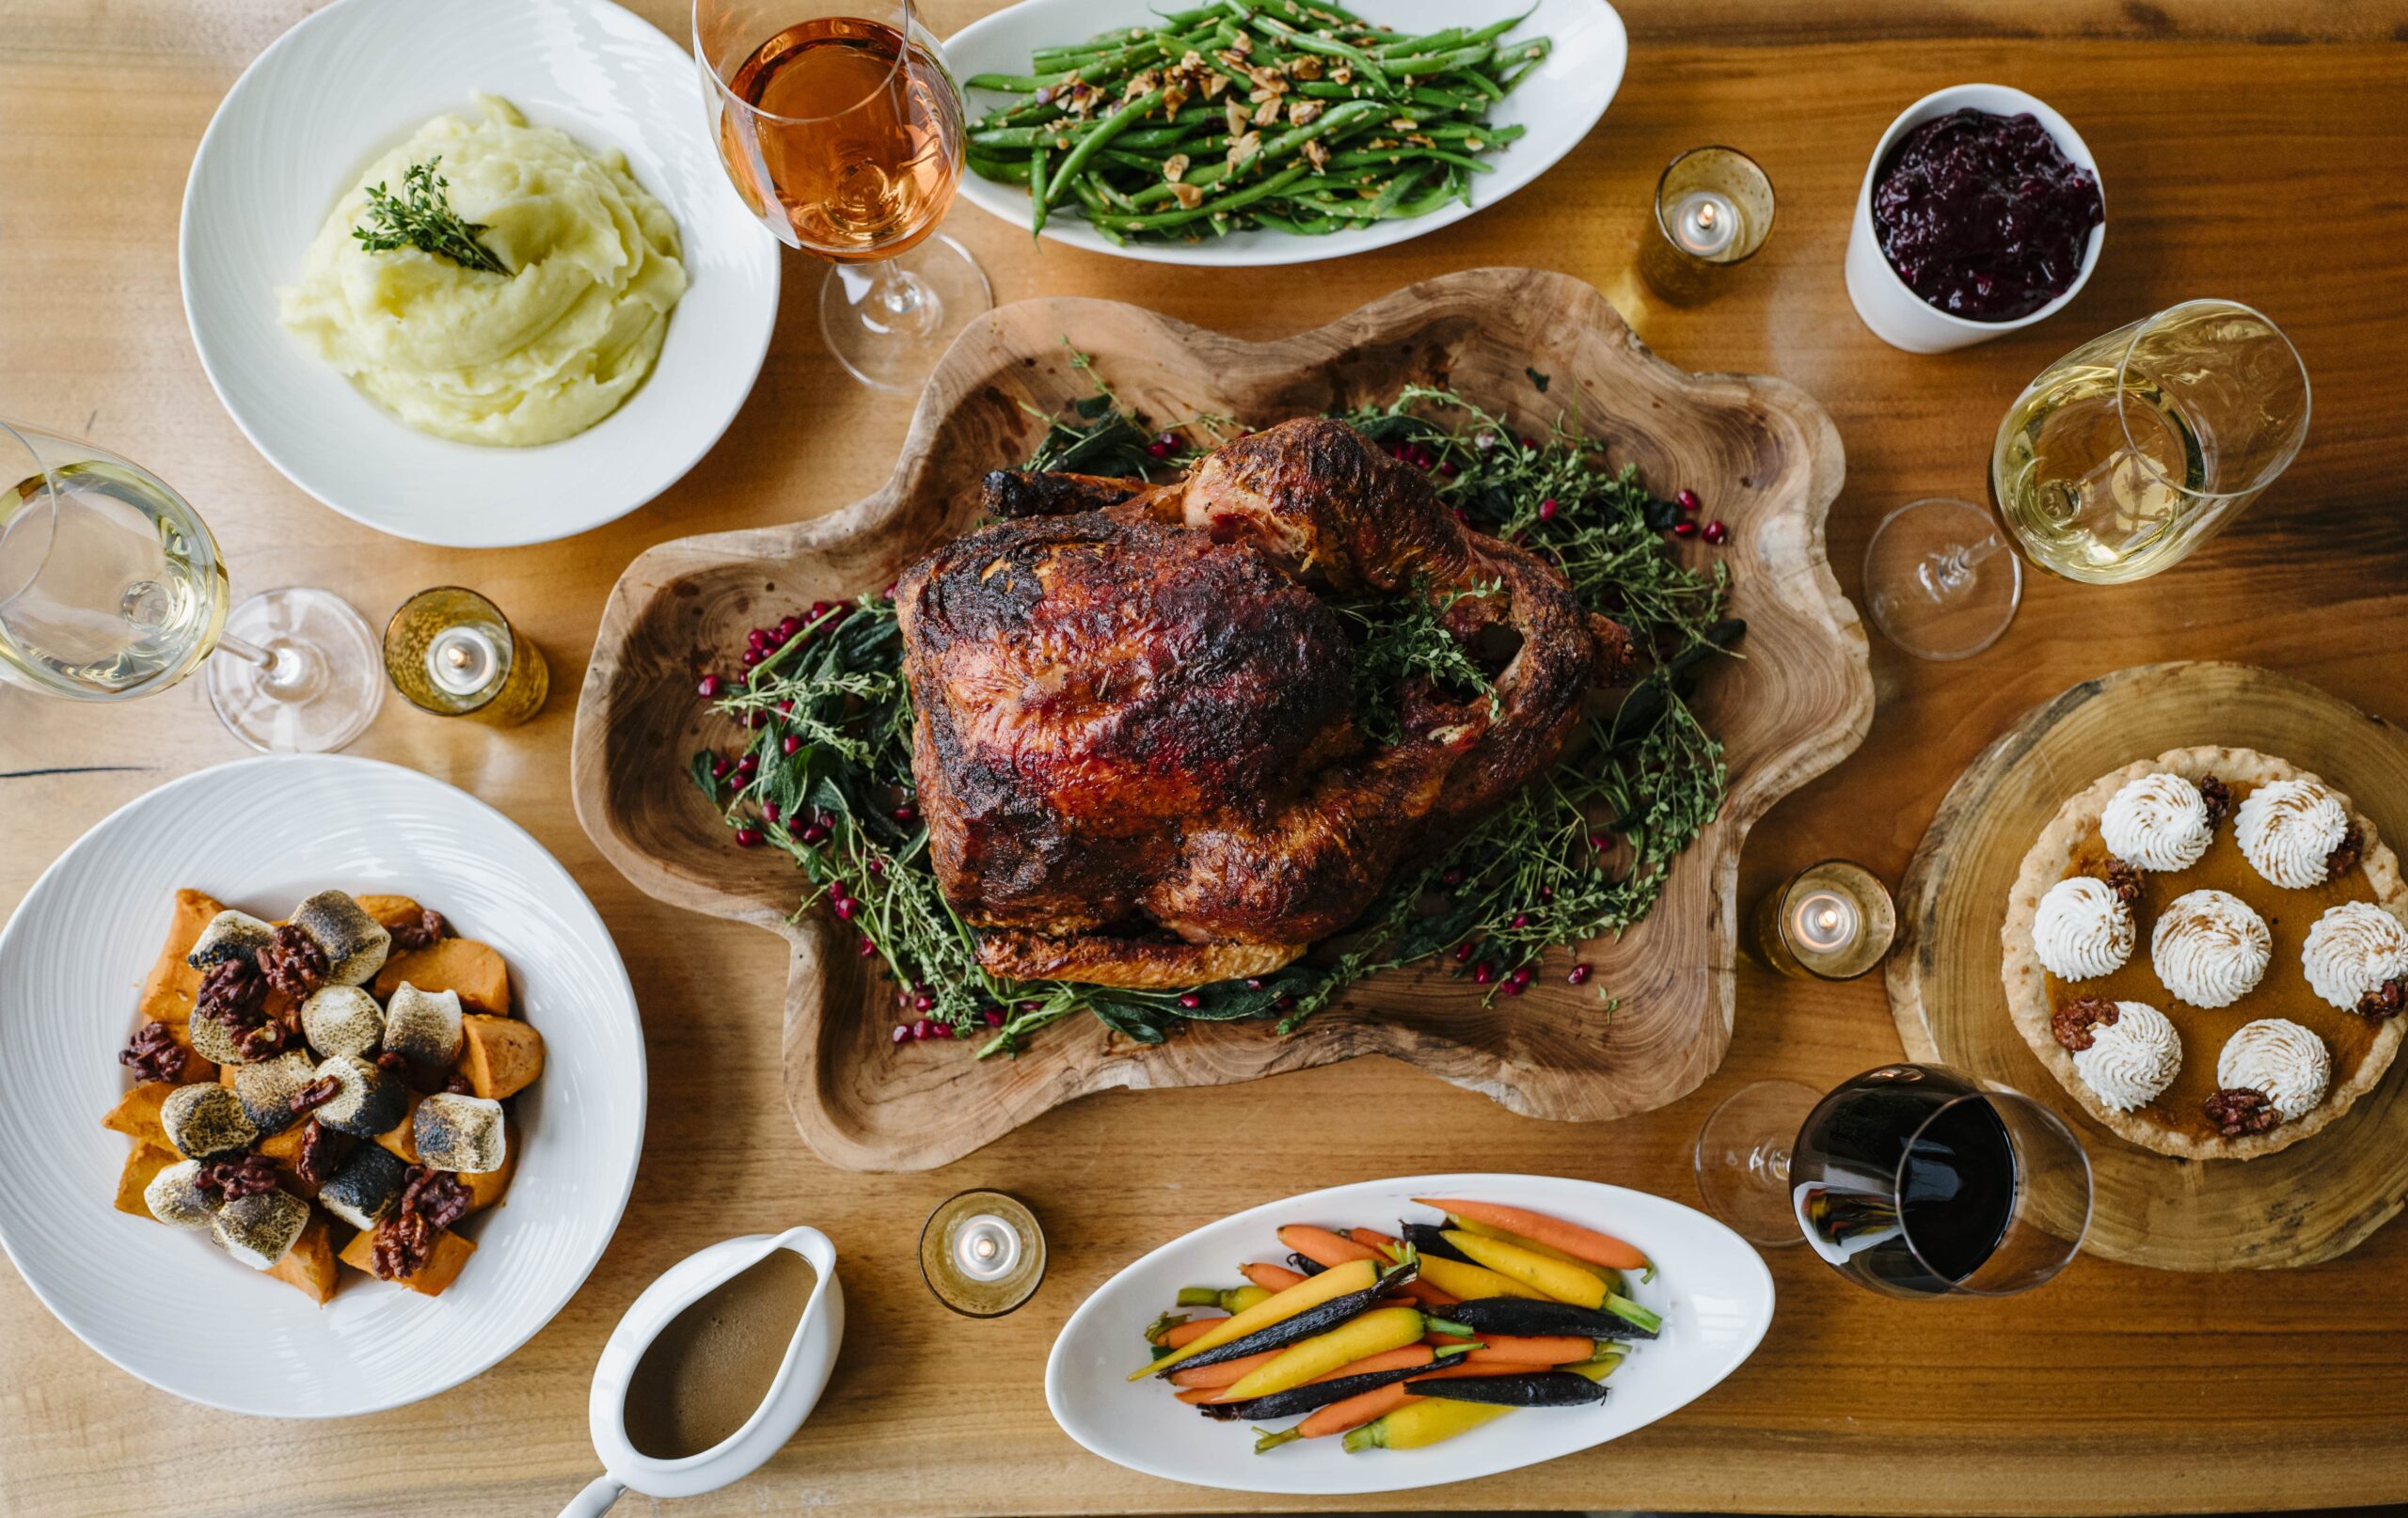 Loews Santa Monica Beach Hotel invites guests to celebrate Thanksgiving by the beach with a festive dinner at Blue Streak restaurant with a menu created by Executive Chef Chris O’Connell. 